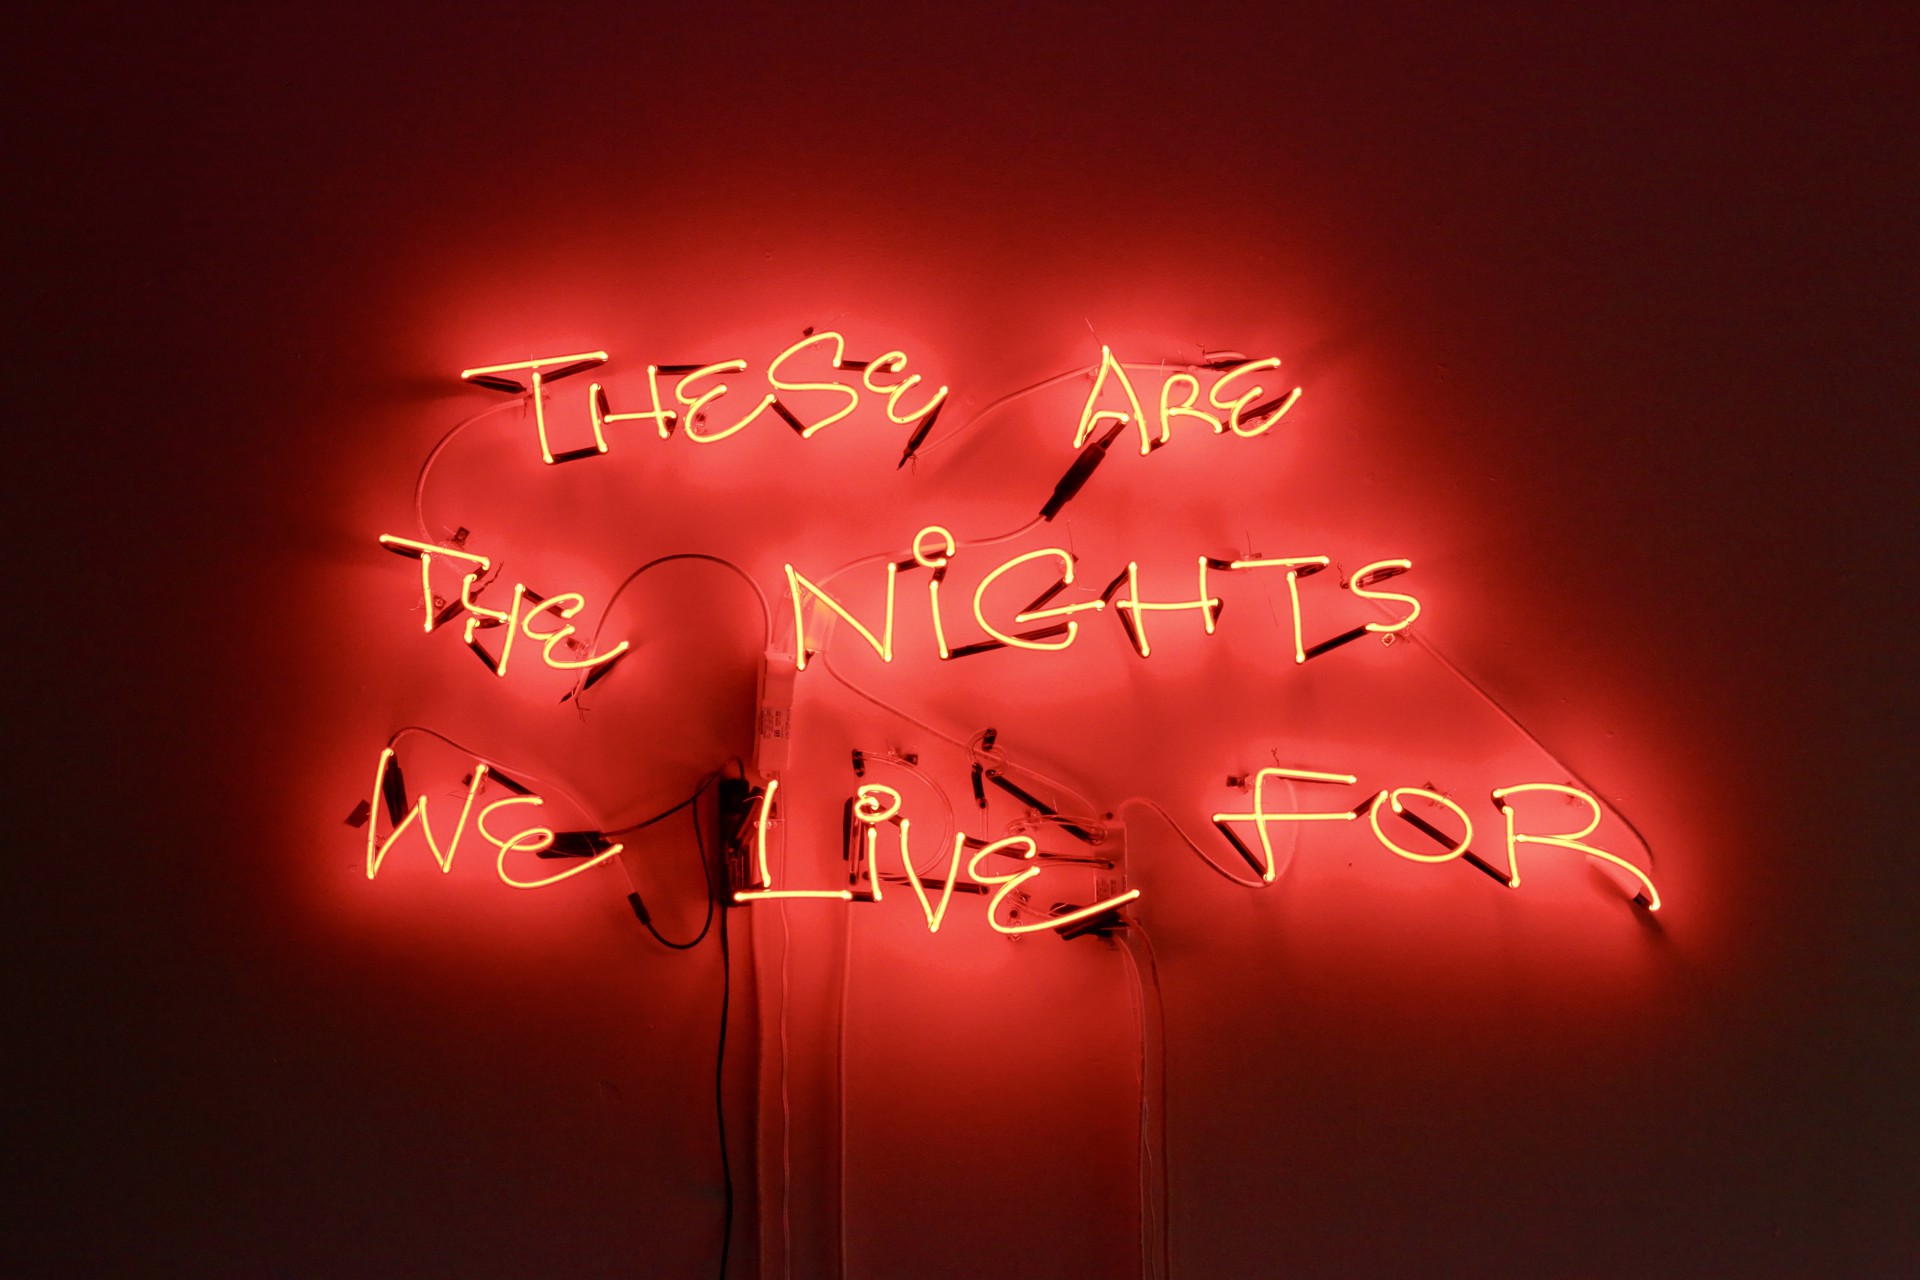 These are the nights we live(die) for by Yale Wolf